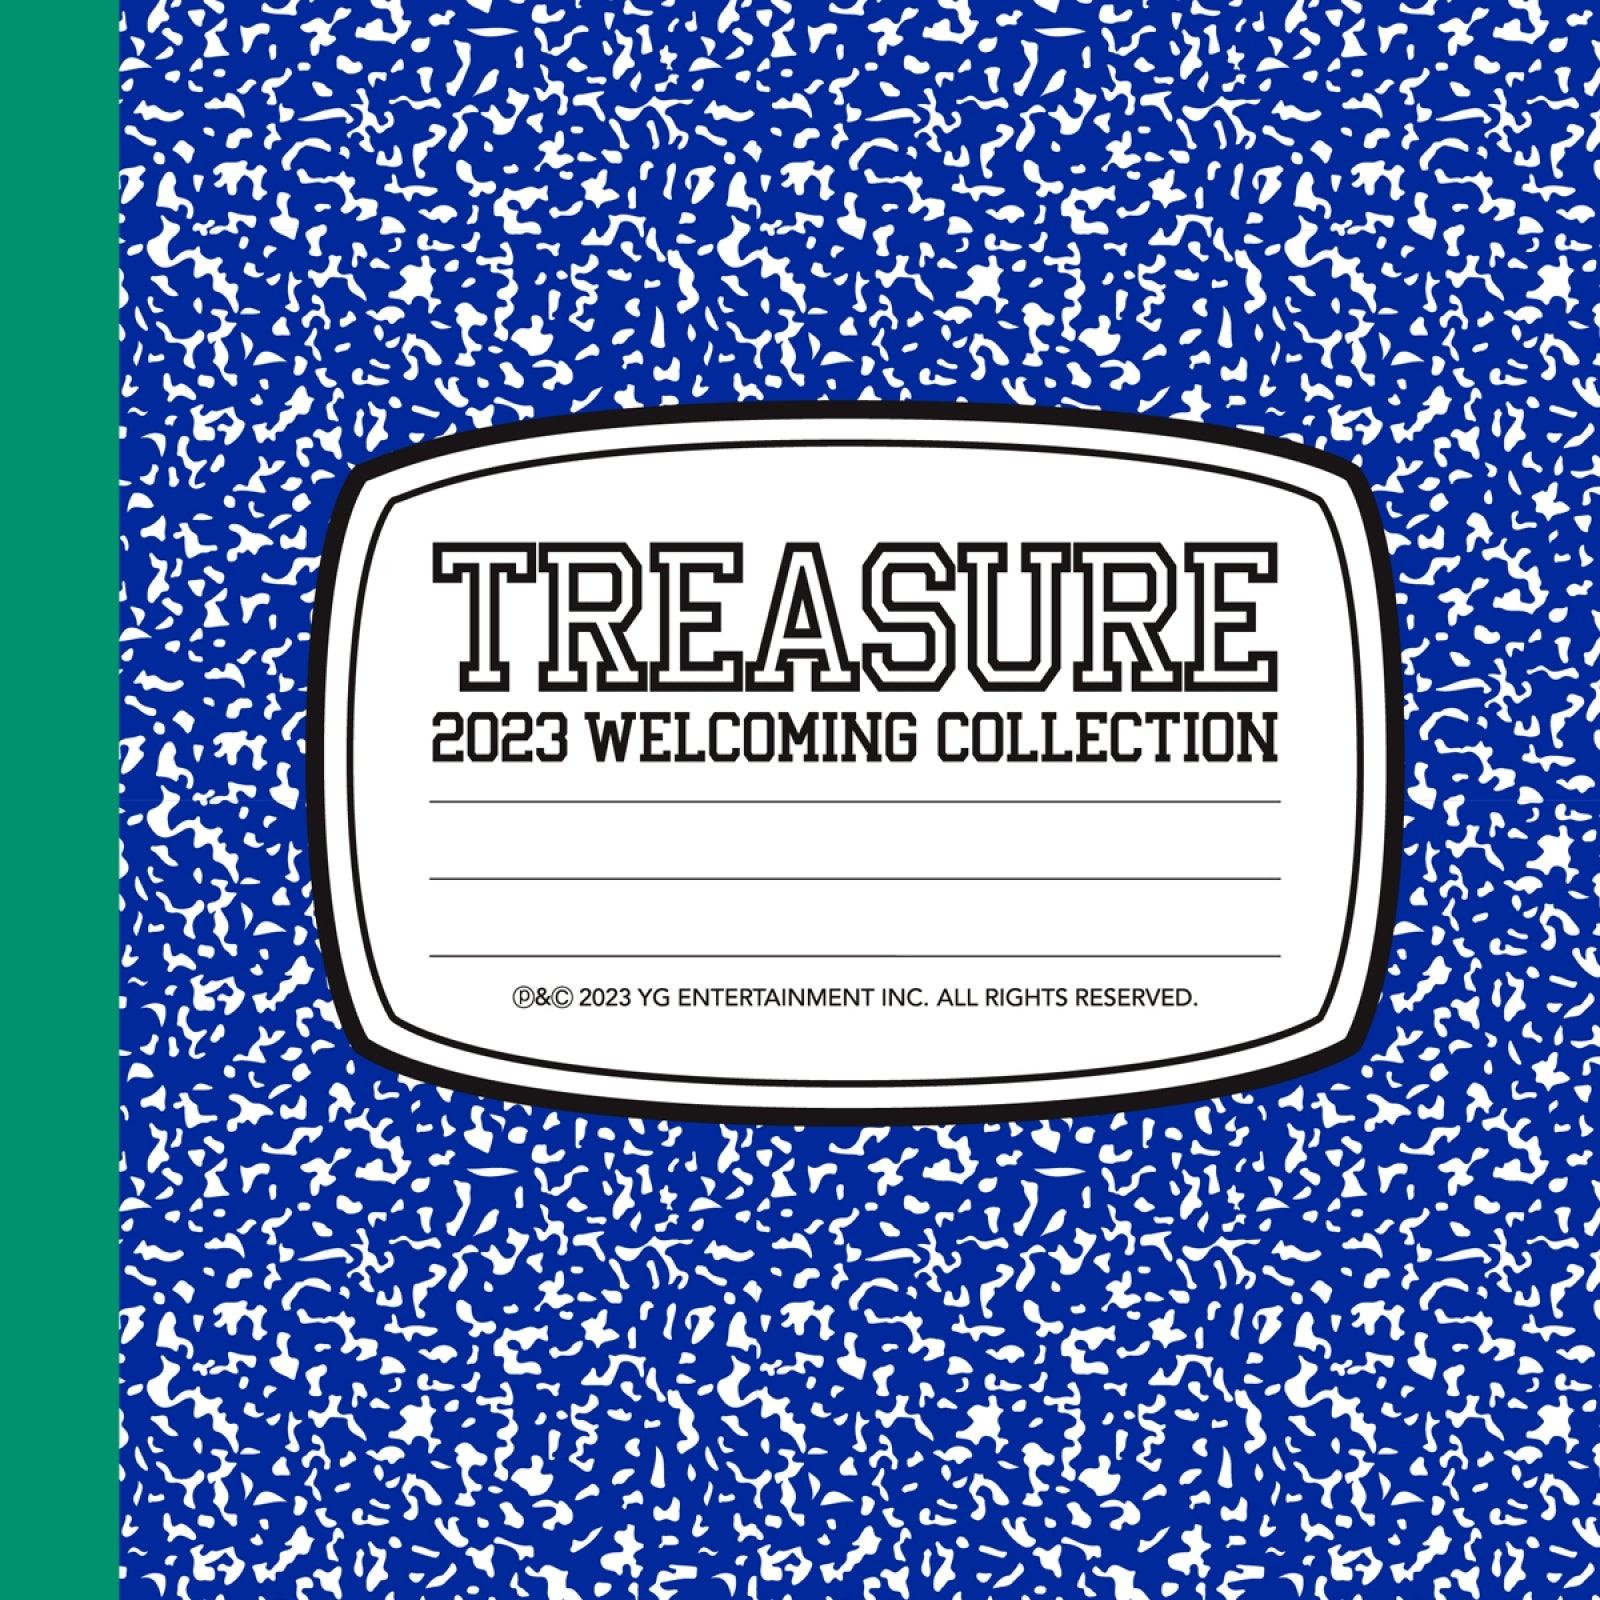 TREASURE - TREASURE 2023 WELCOMING COLLECTION - Shopping Around the World with Goodsnjoy